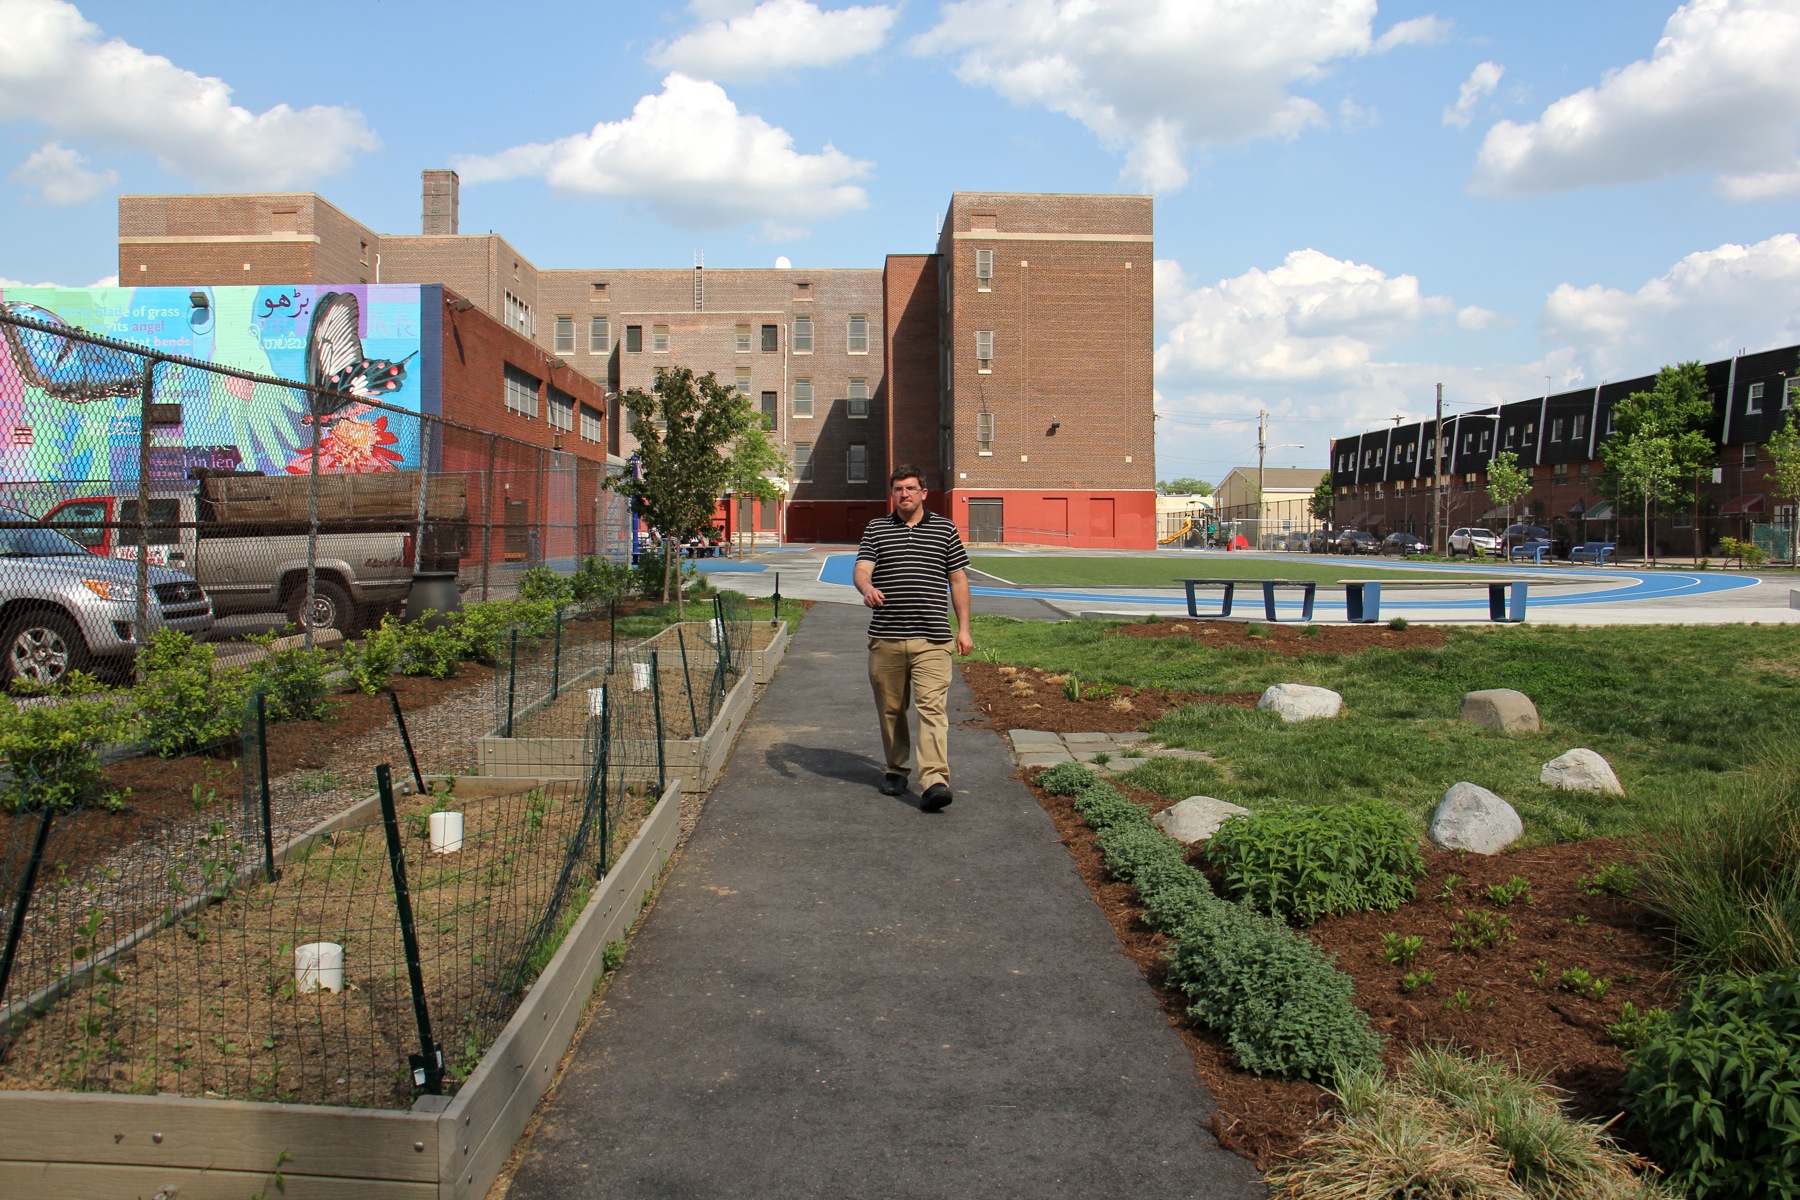 Raised garden beds are used by Taggart School's diverse community to raise food, says Dean of Students David Hensel. (Emma Lee/WHYY)